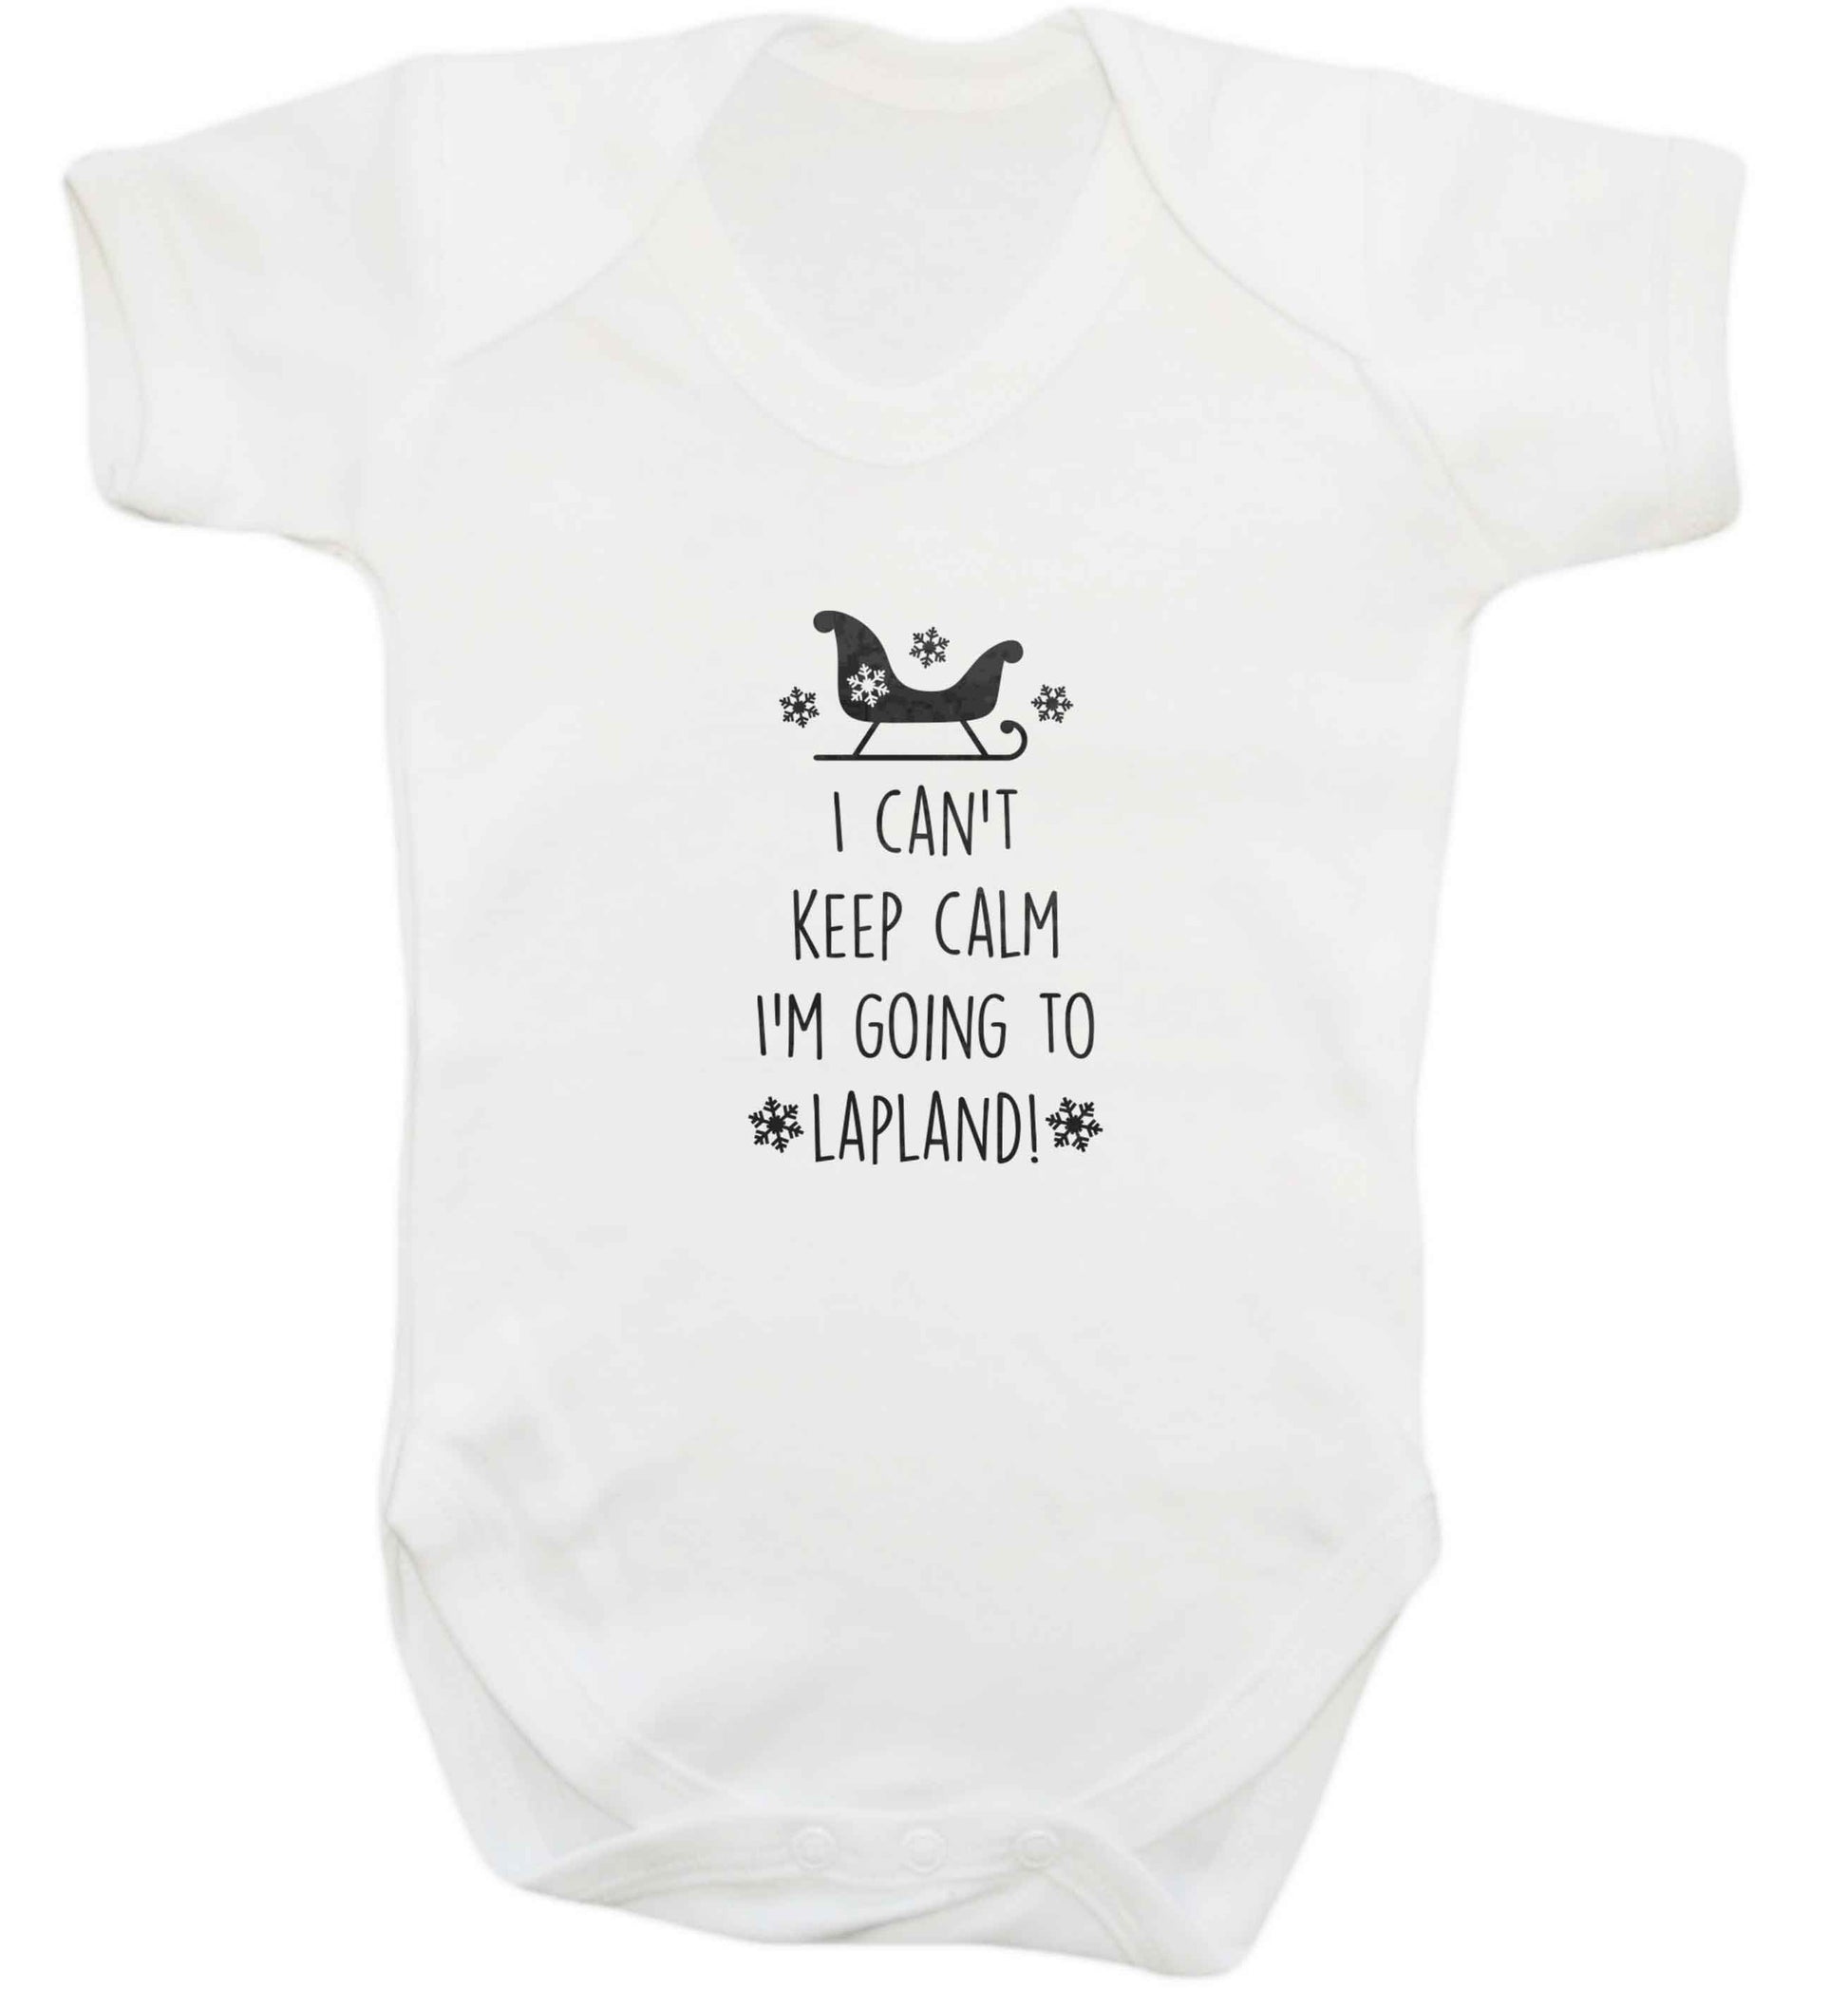 I can't keep calm I'm going to Lapland baby vest white 18-24 months